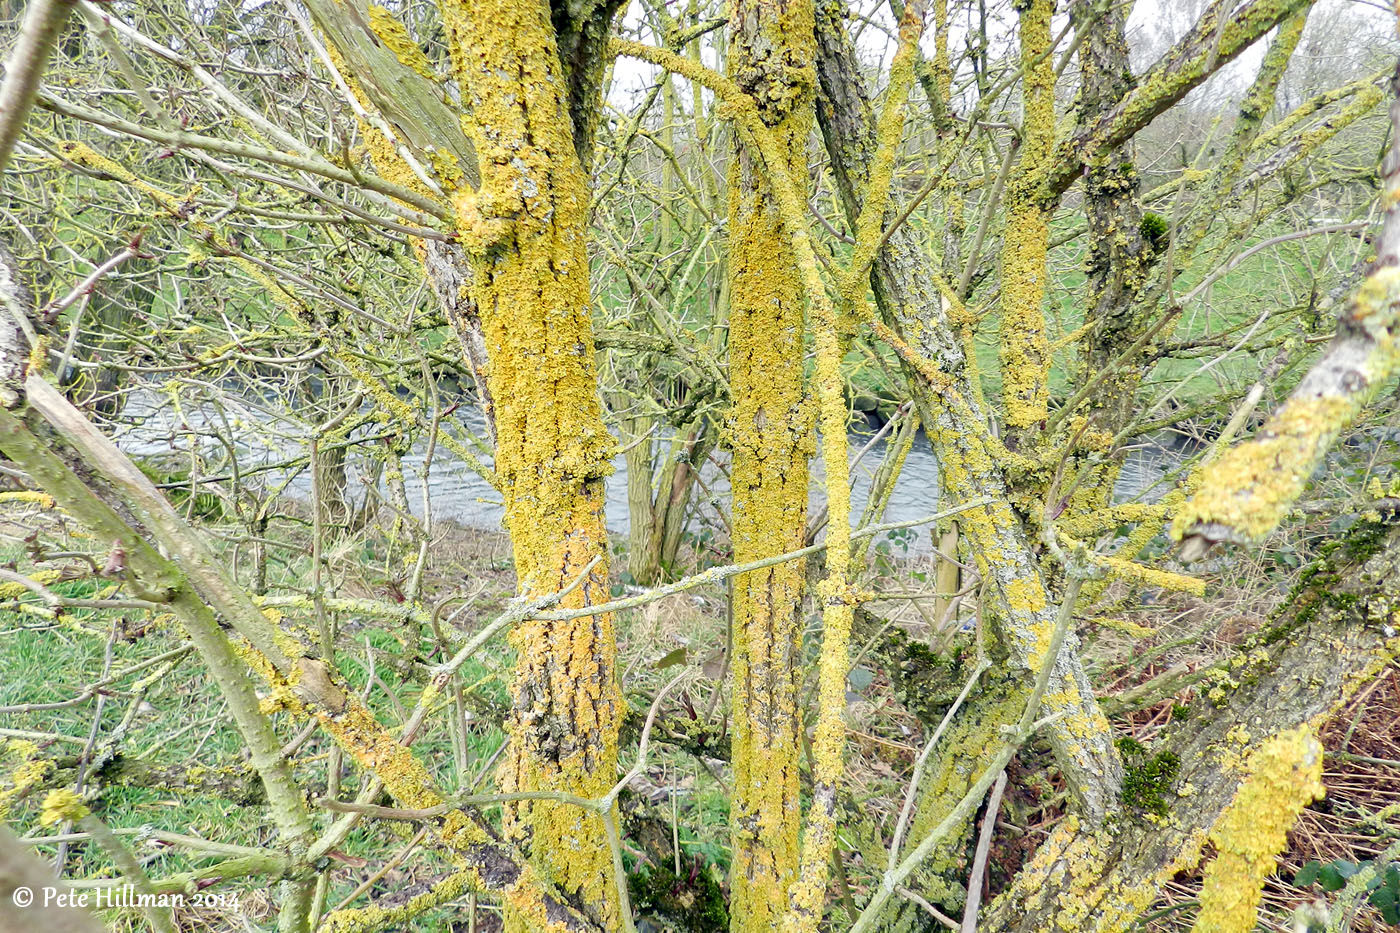 Lichen encrusted trees